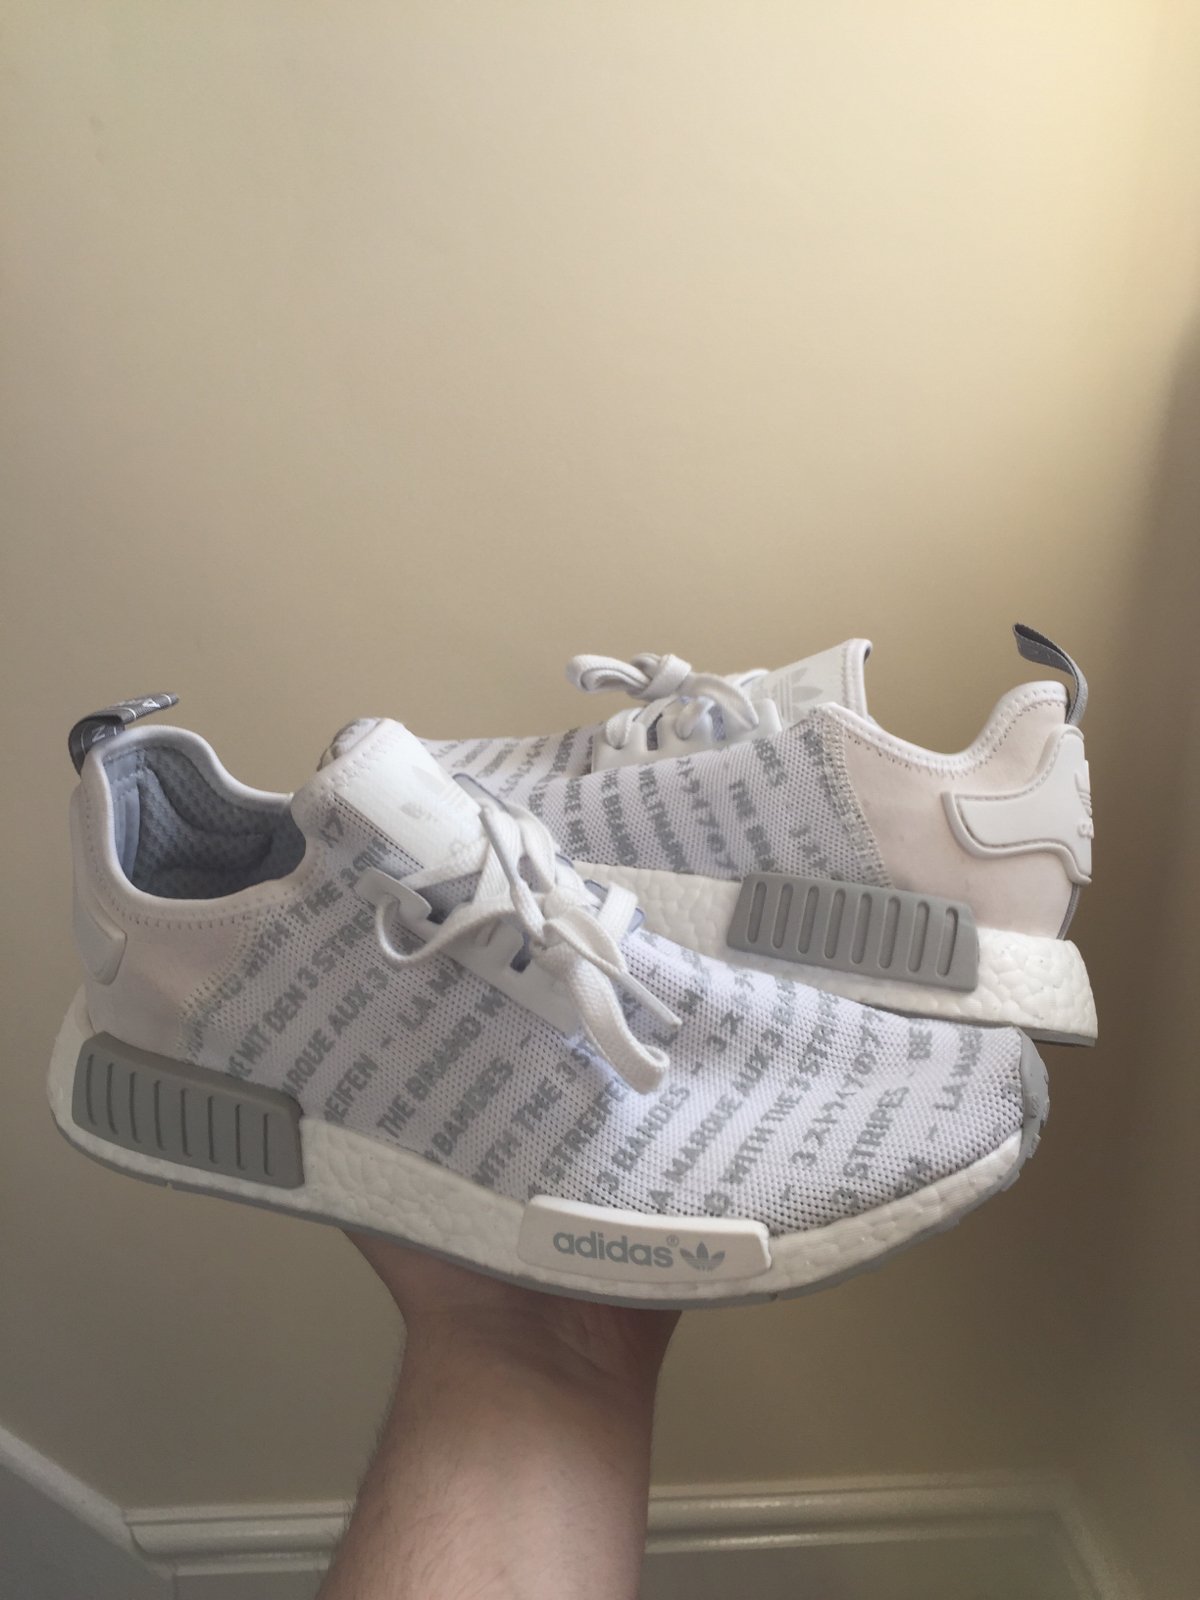 white out nmd